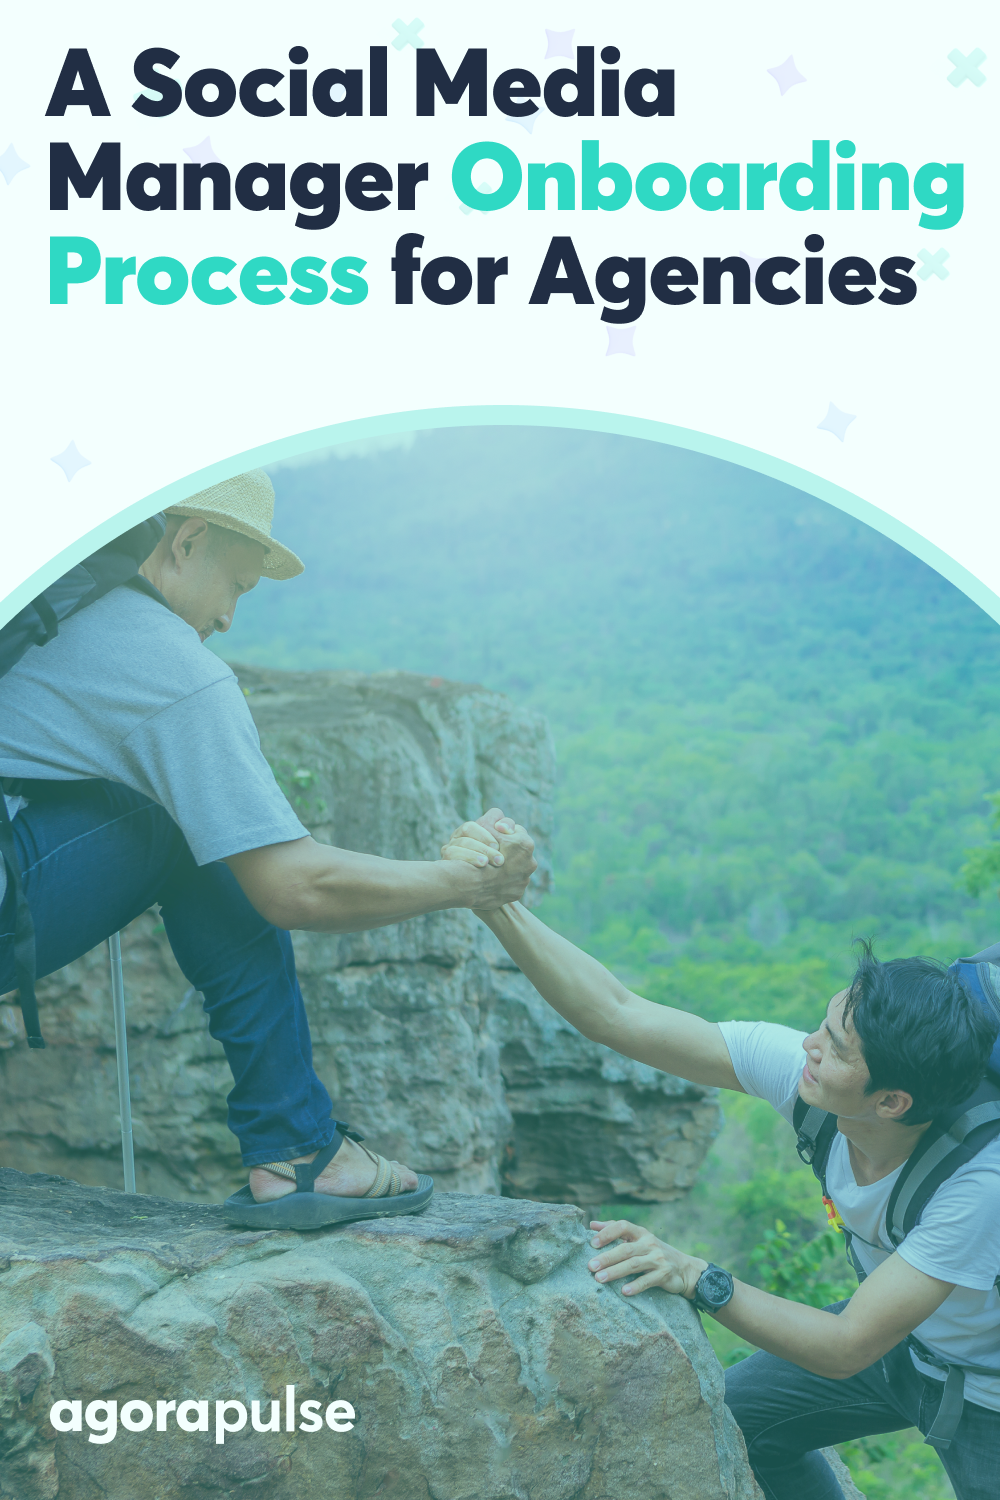 A Social Media Onboarding Process for Agencies to Maximize Time-to-Value